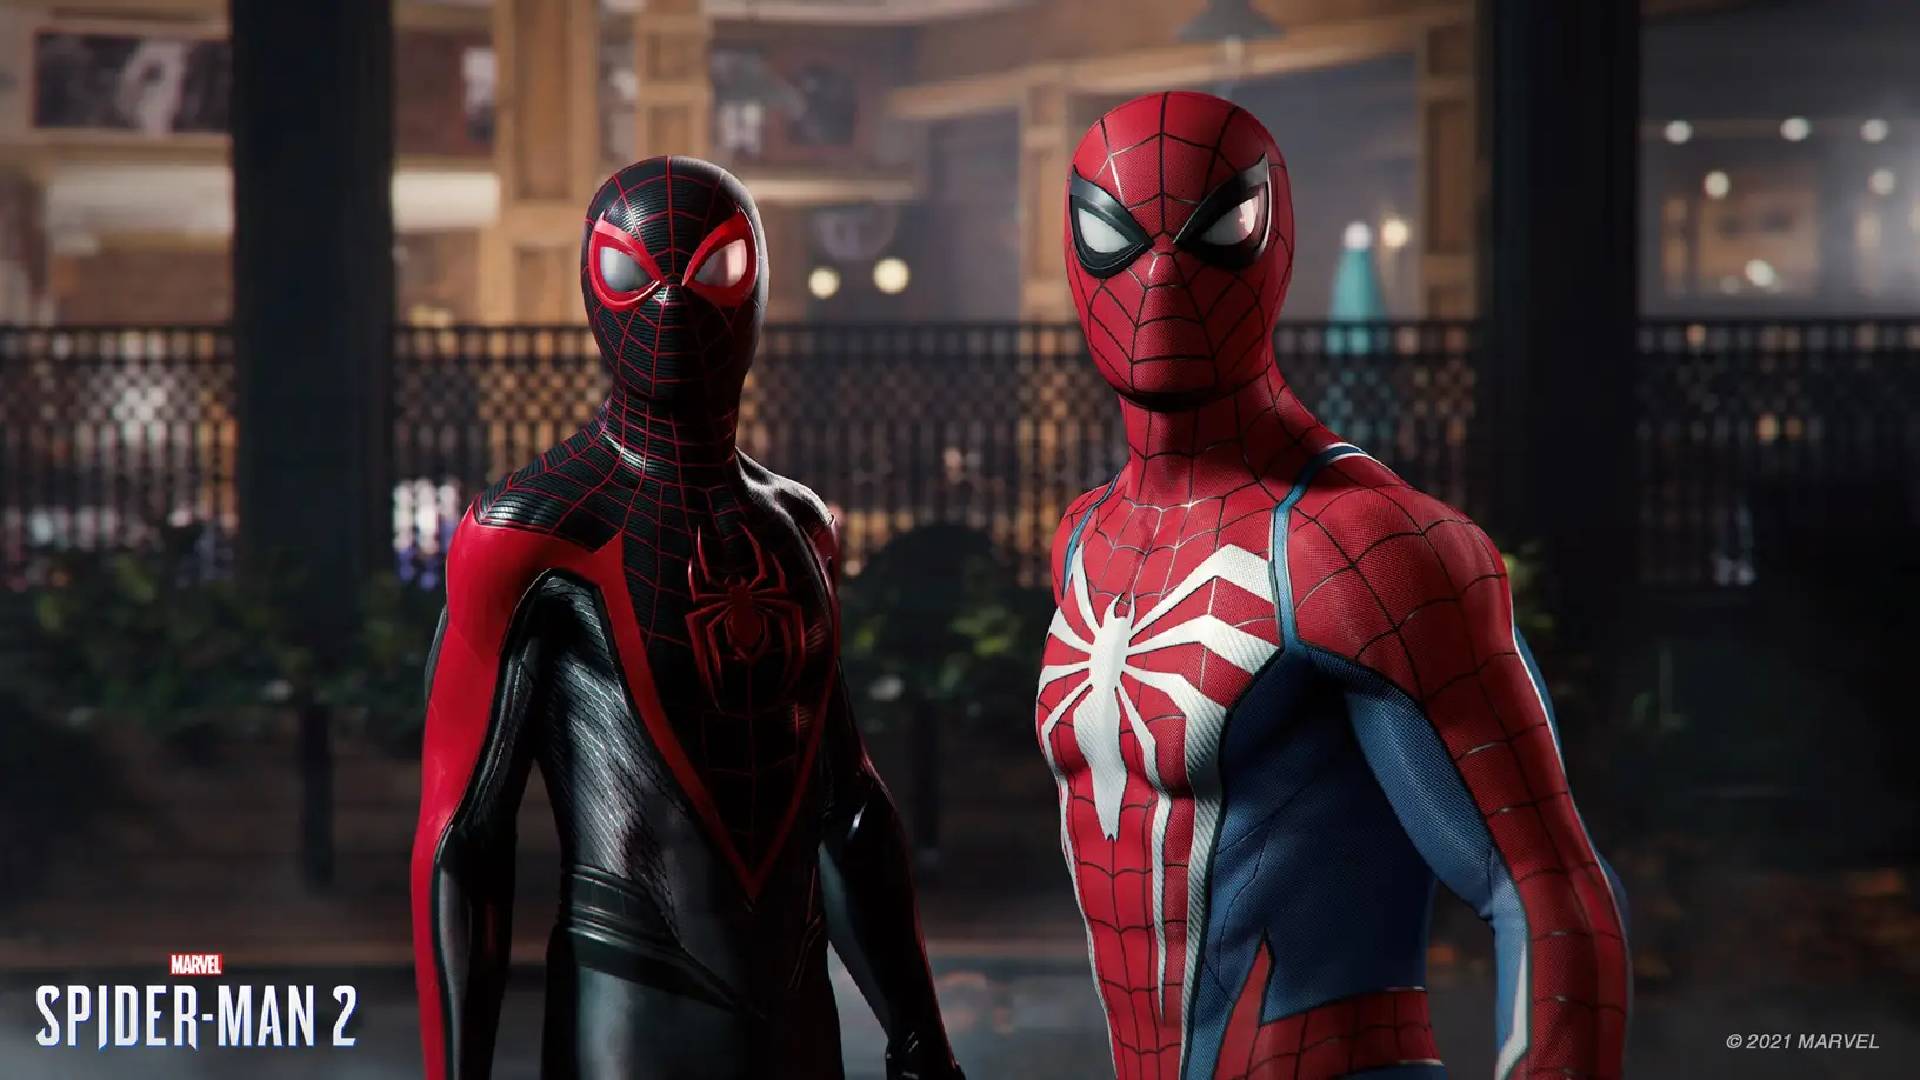 One of the best PlayStation games is coming to PC, and yes, it's Spider-Man!